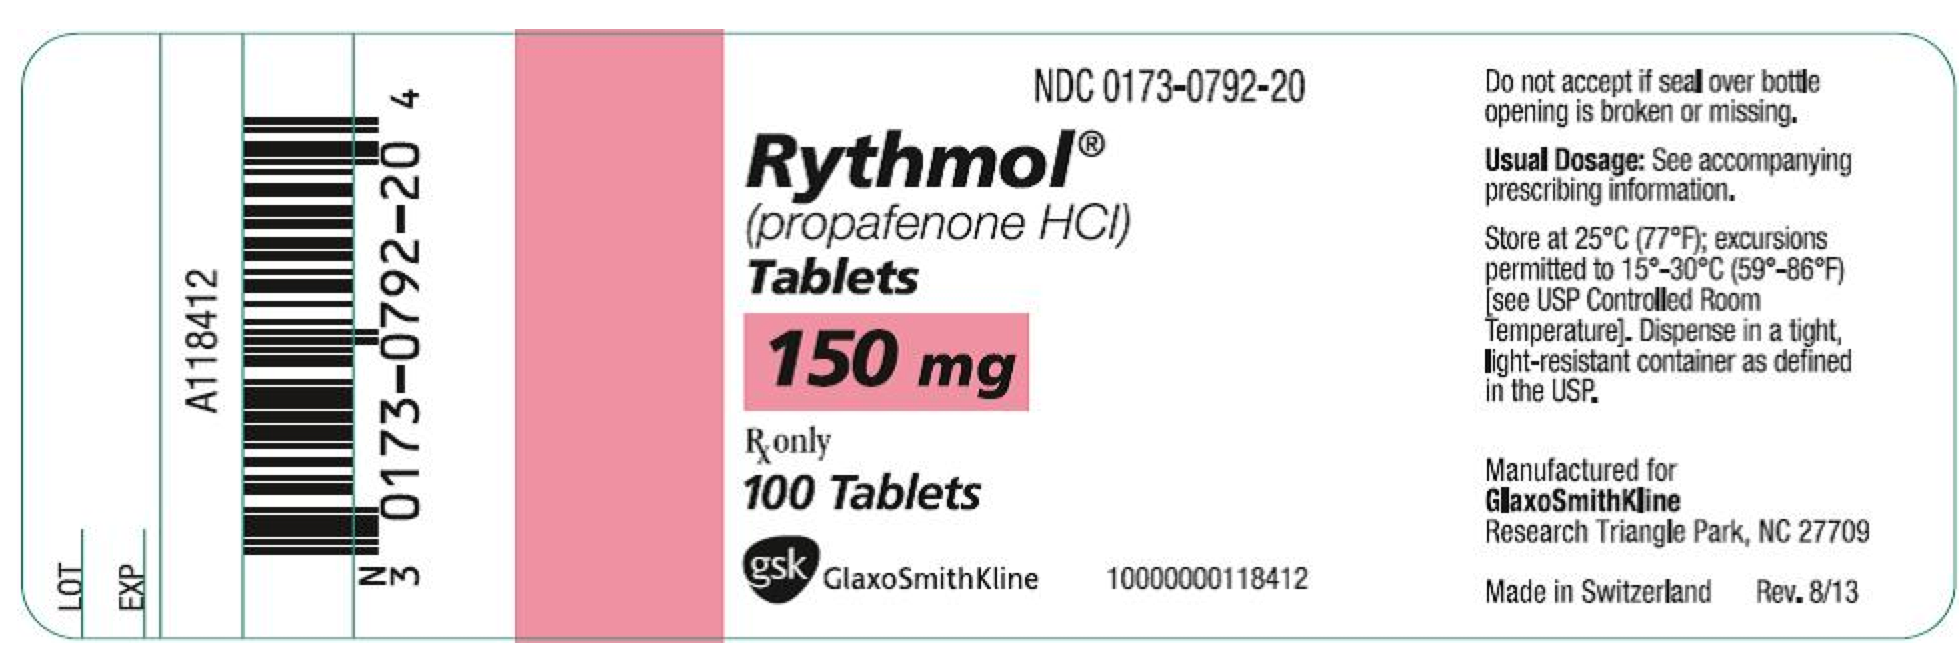 File:Propafenone05.png